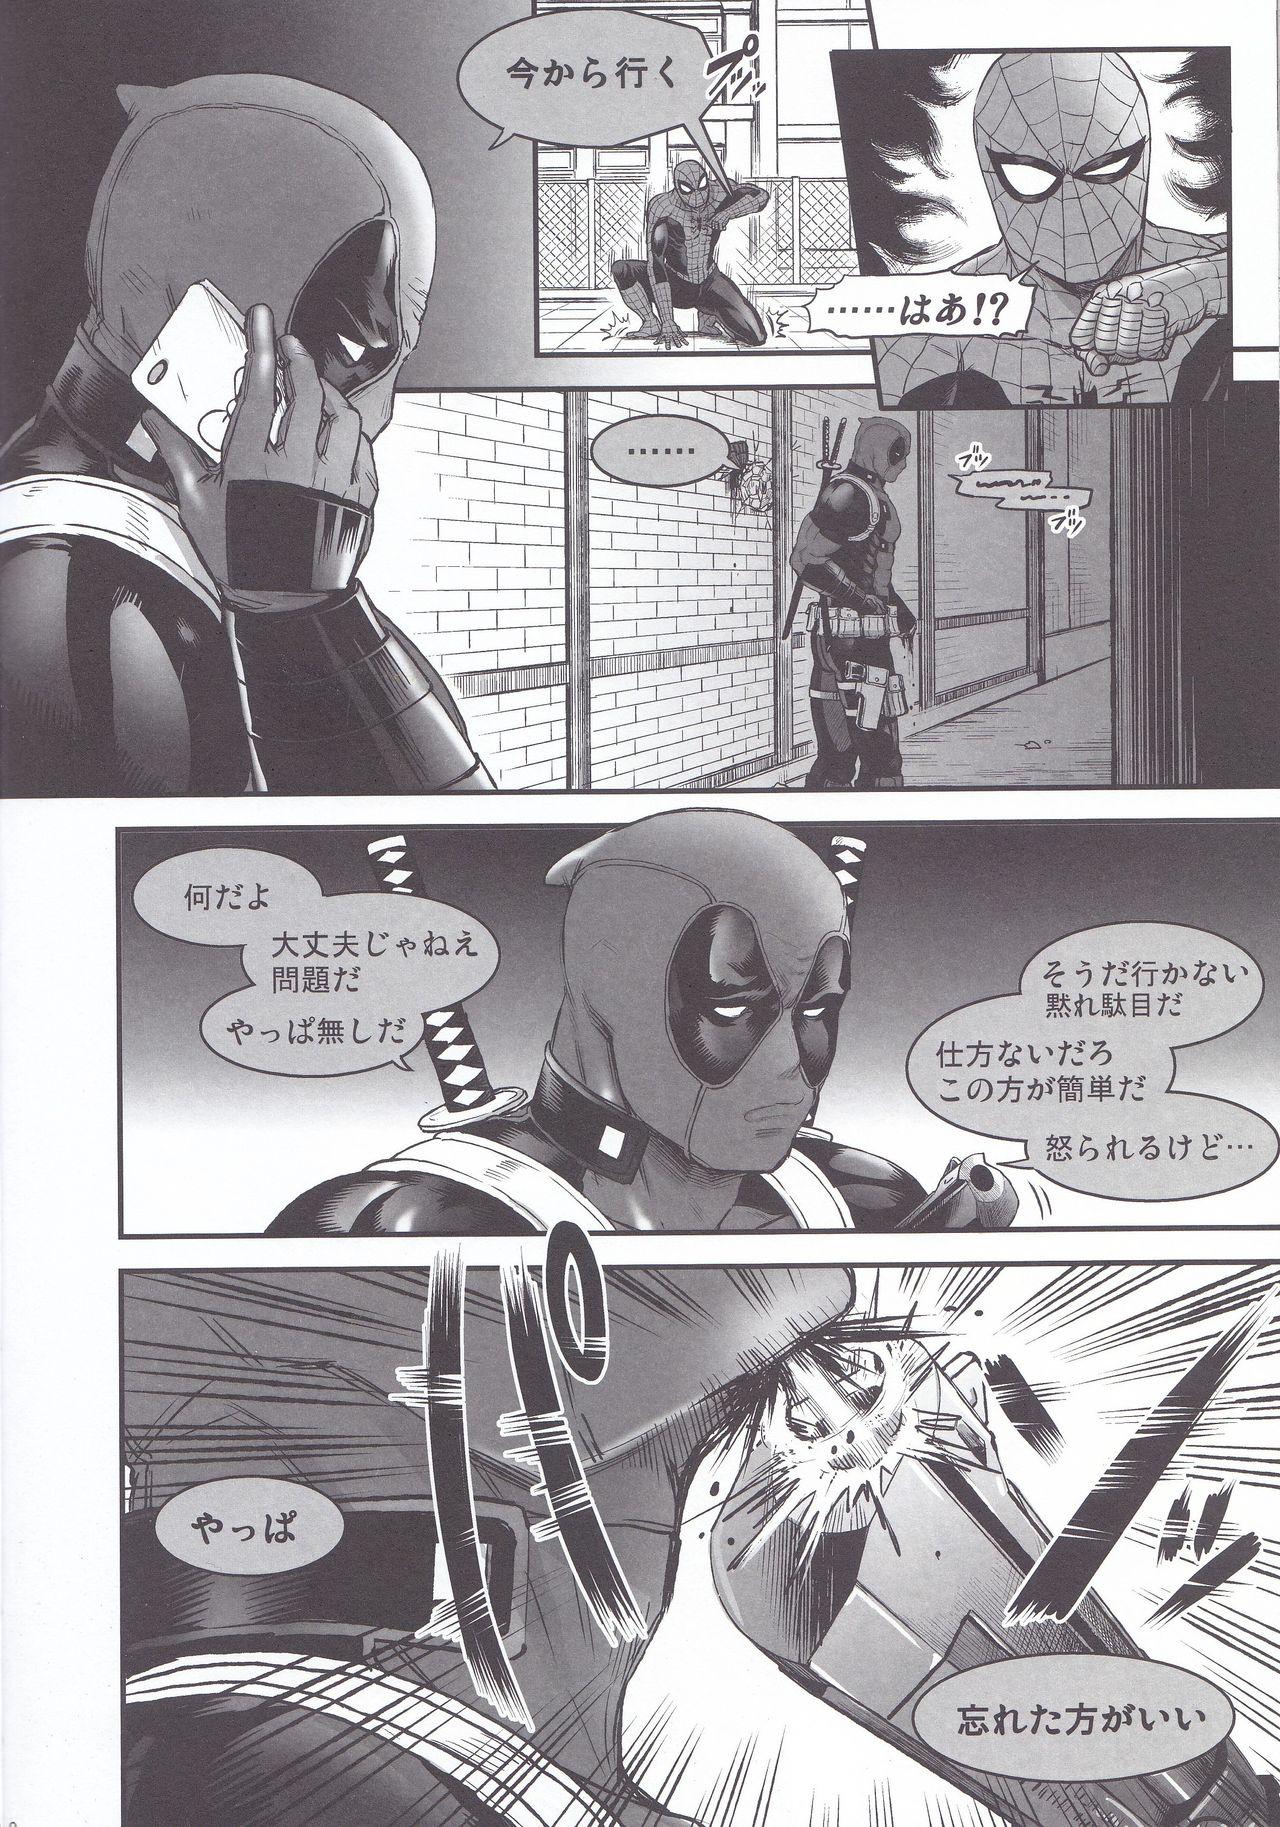 Cam Girl Hollow - Spider man Deadpool Teenage - Page 8